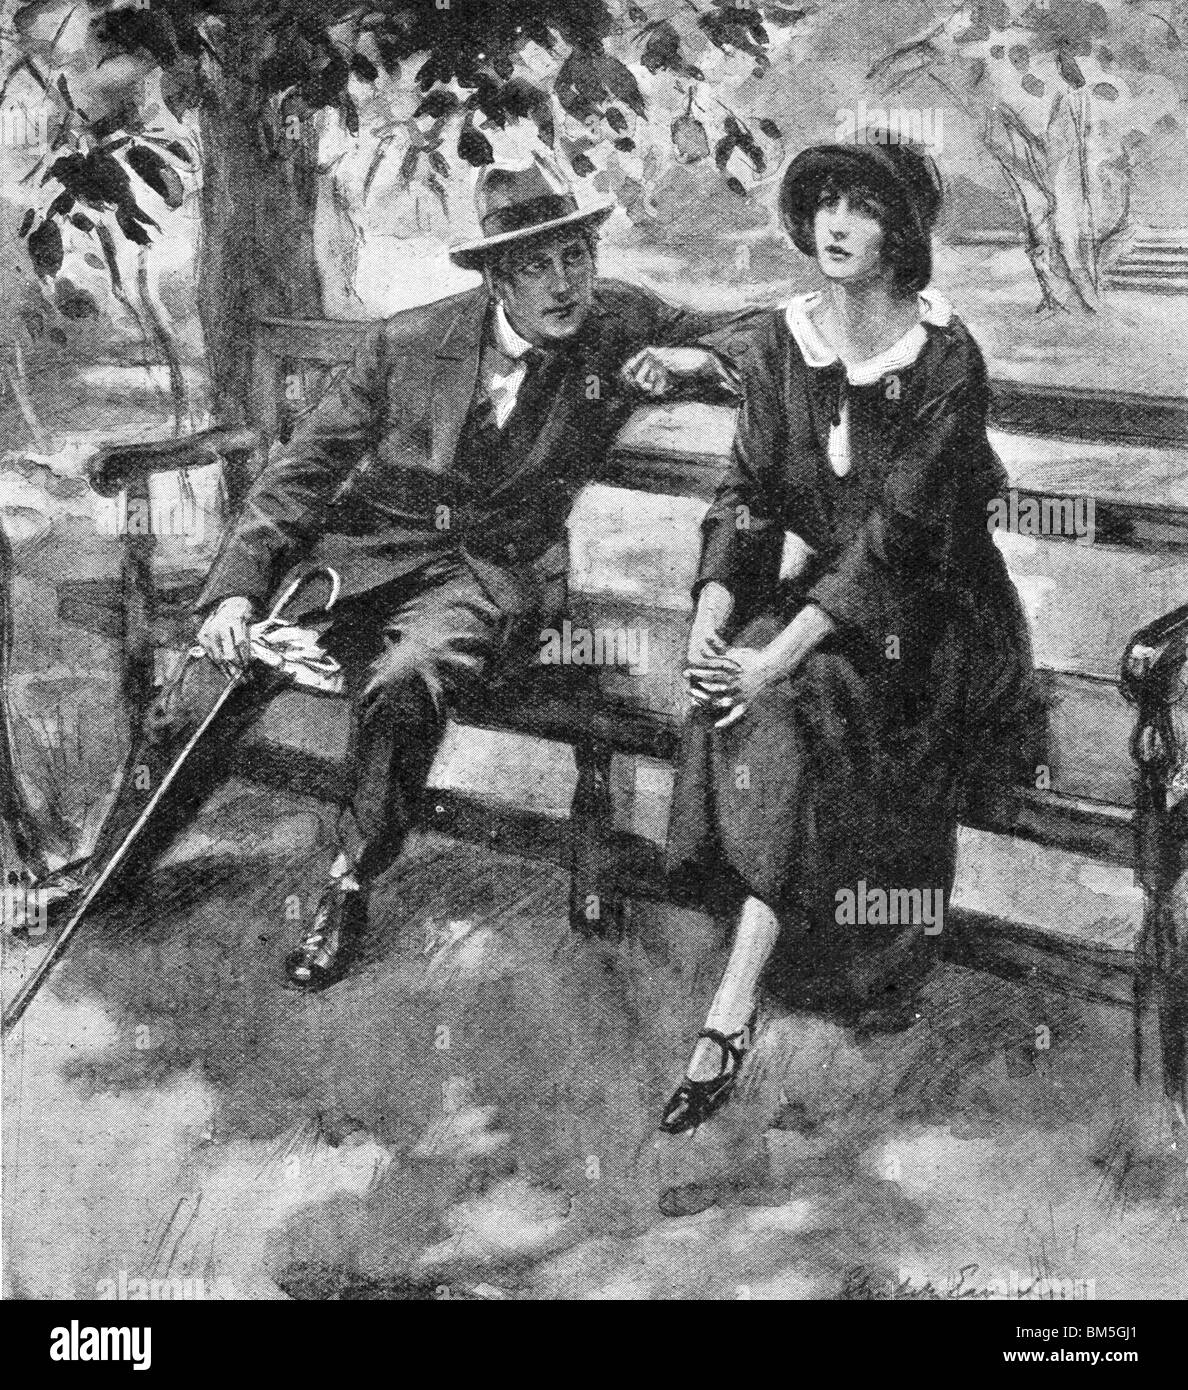 She Stared in front trying to keep back the tears, but they would come.  Woman and Man Talking on the Park Bench Stock Photo